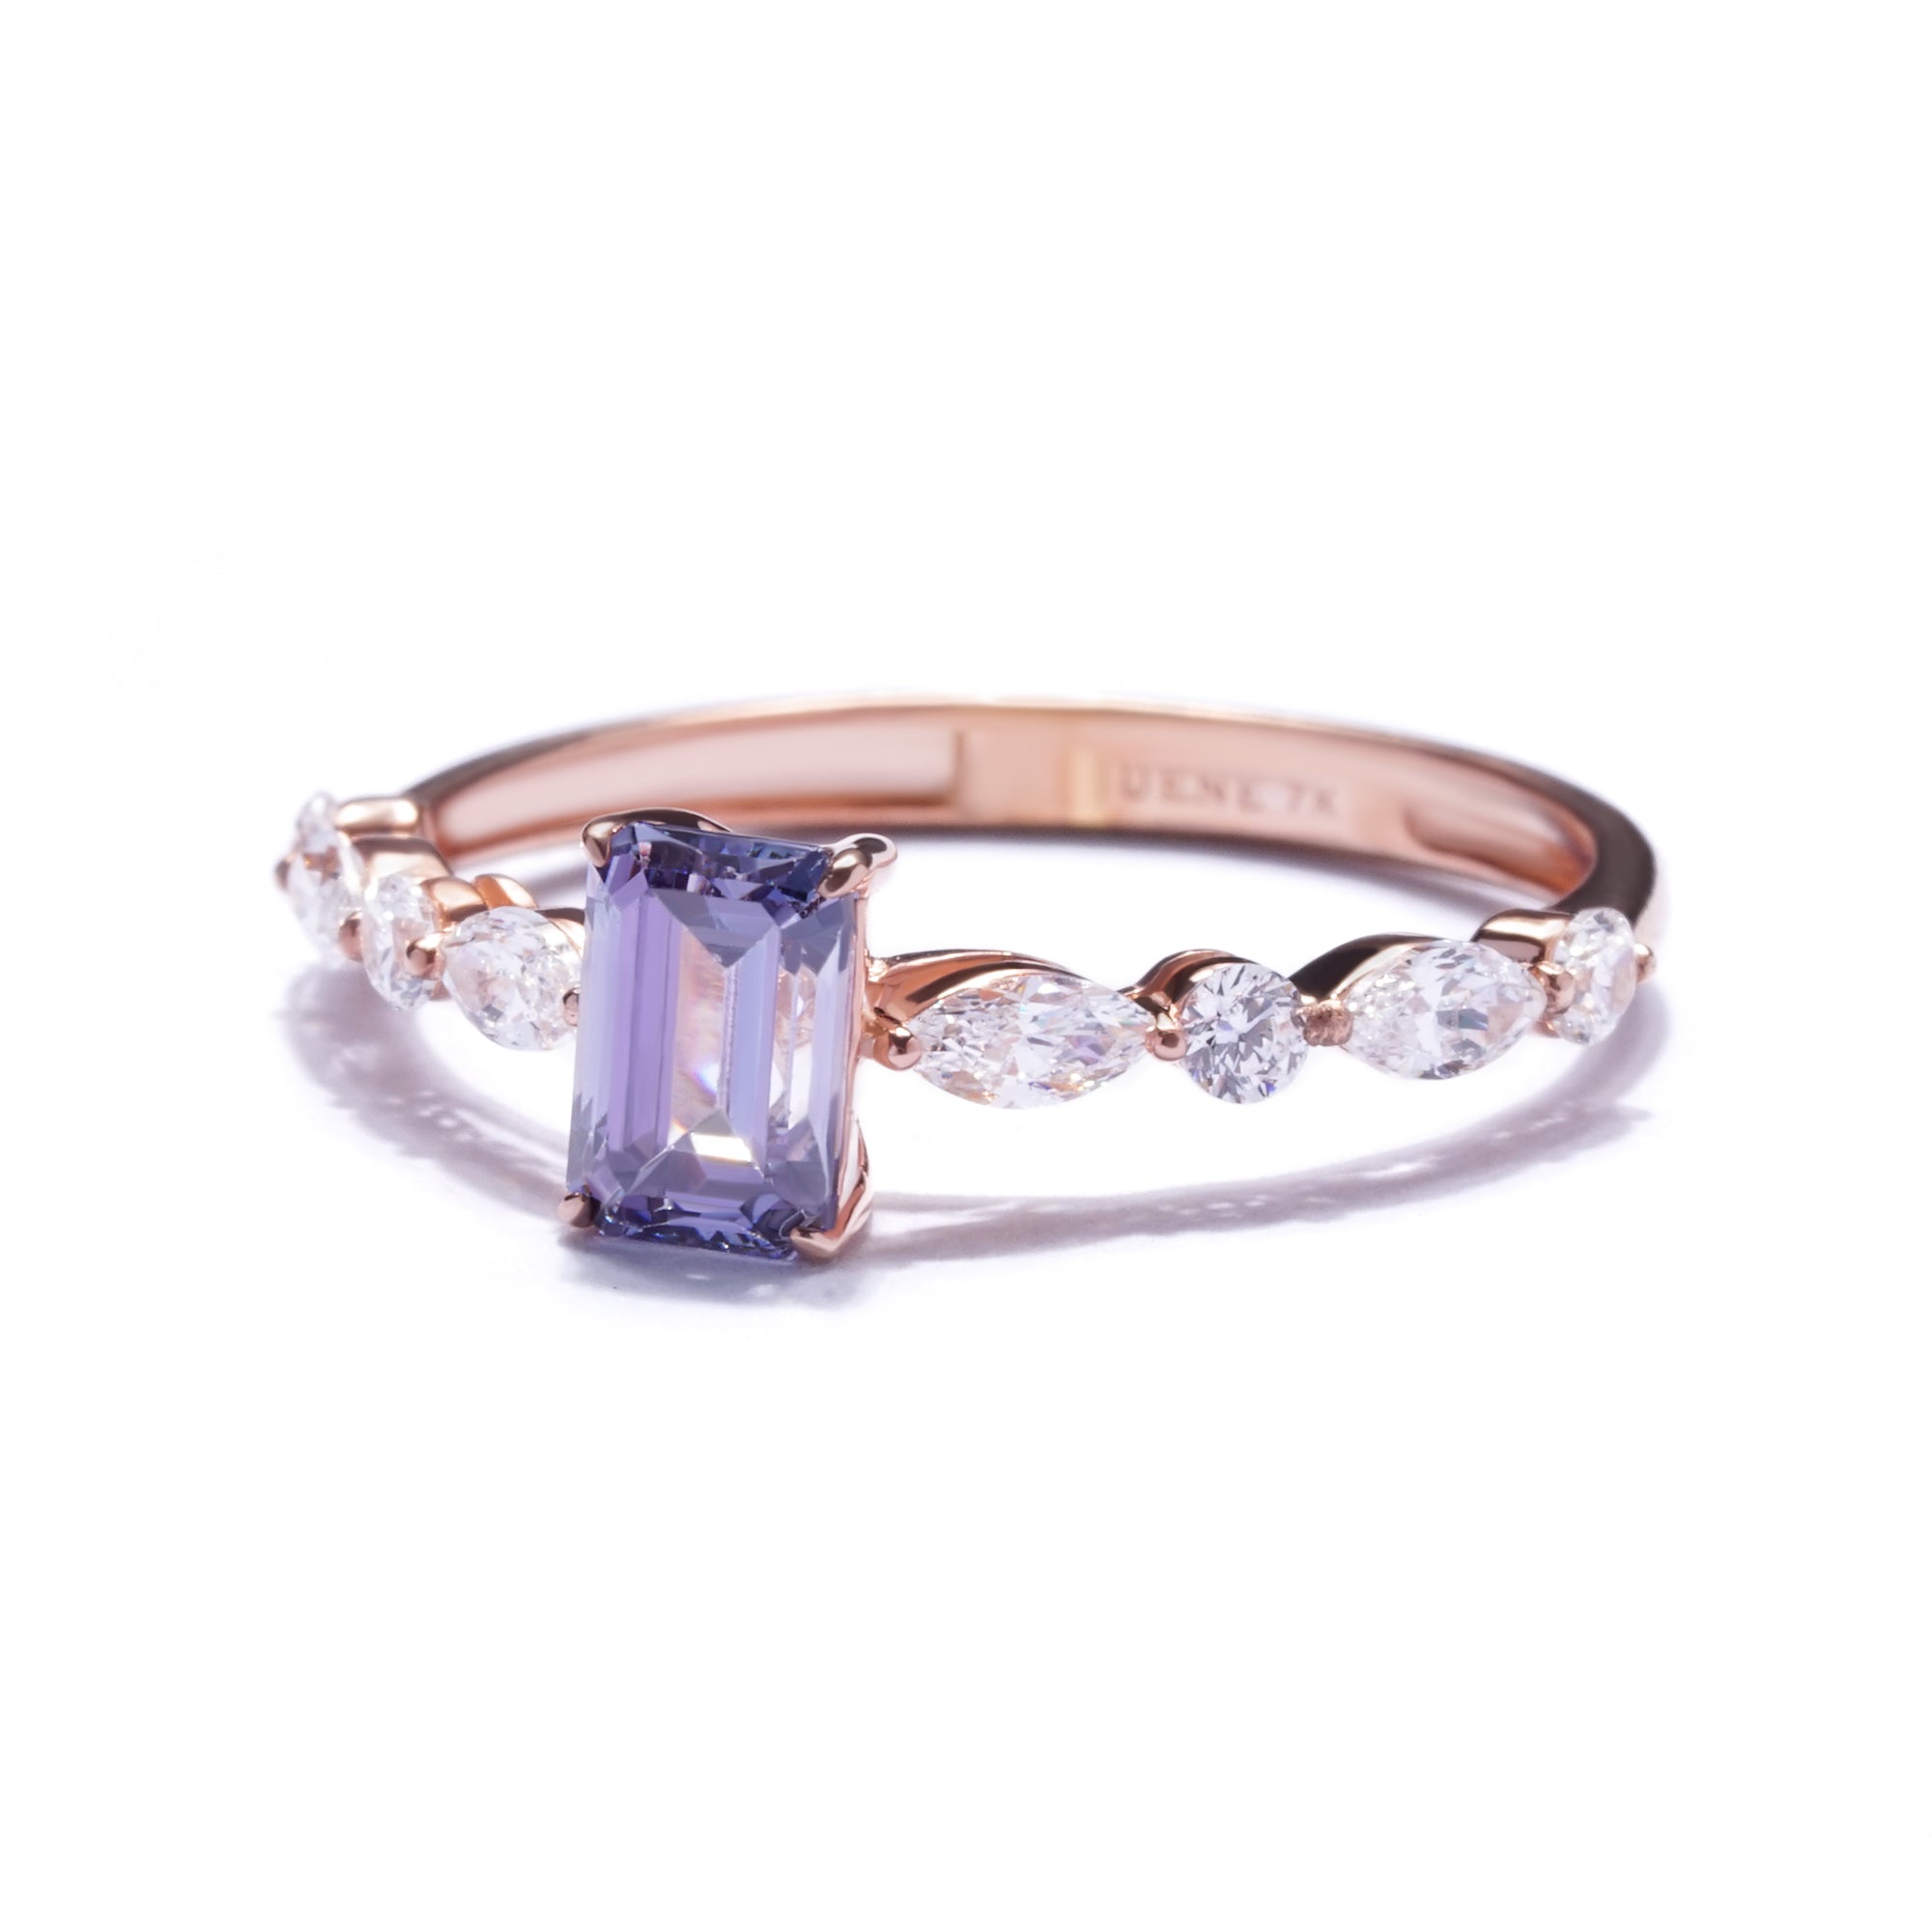 Elia Gold Ring - Twilight Collection - Juene Jewelry